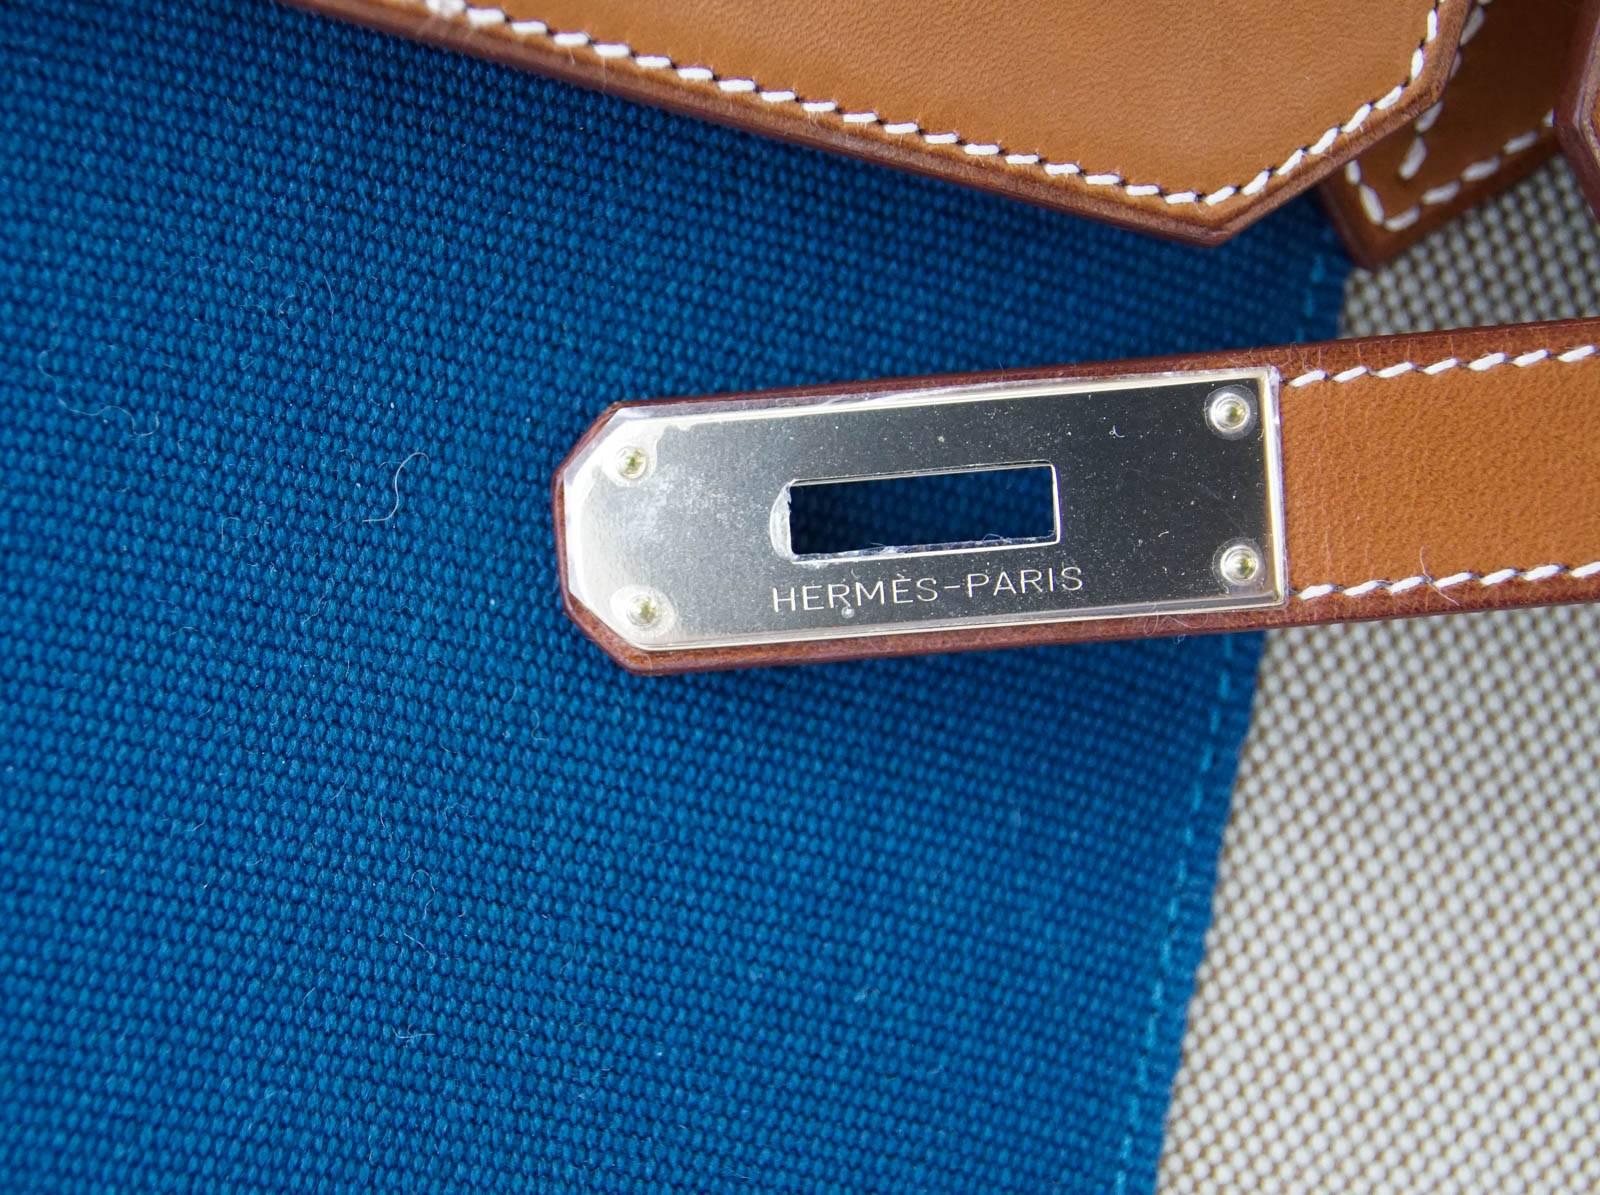 Guaranteed authentic Limited Edition no longer produced Hermes Birkin 35 Flag bag.
Coveted Barenia leather combined with Toile with chic Blue accent.
Permabrass Hardware.
Comes with signature Hermes orange box, sleepers, lock, keys, and